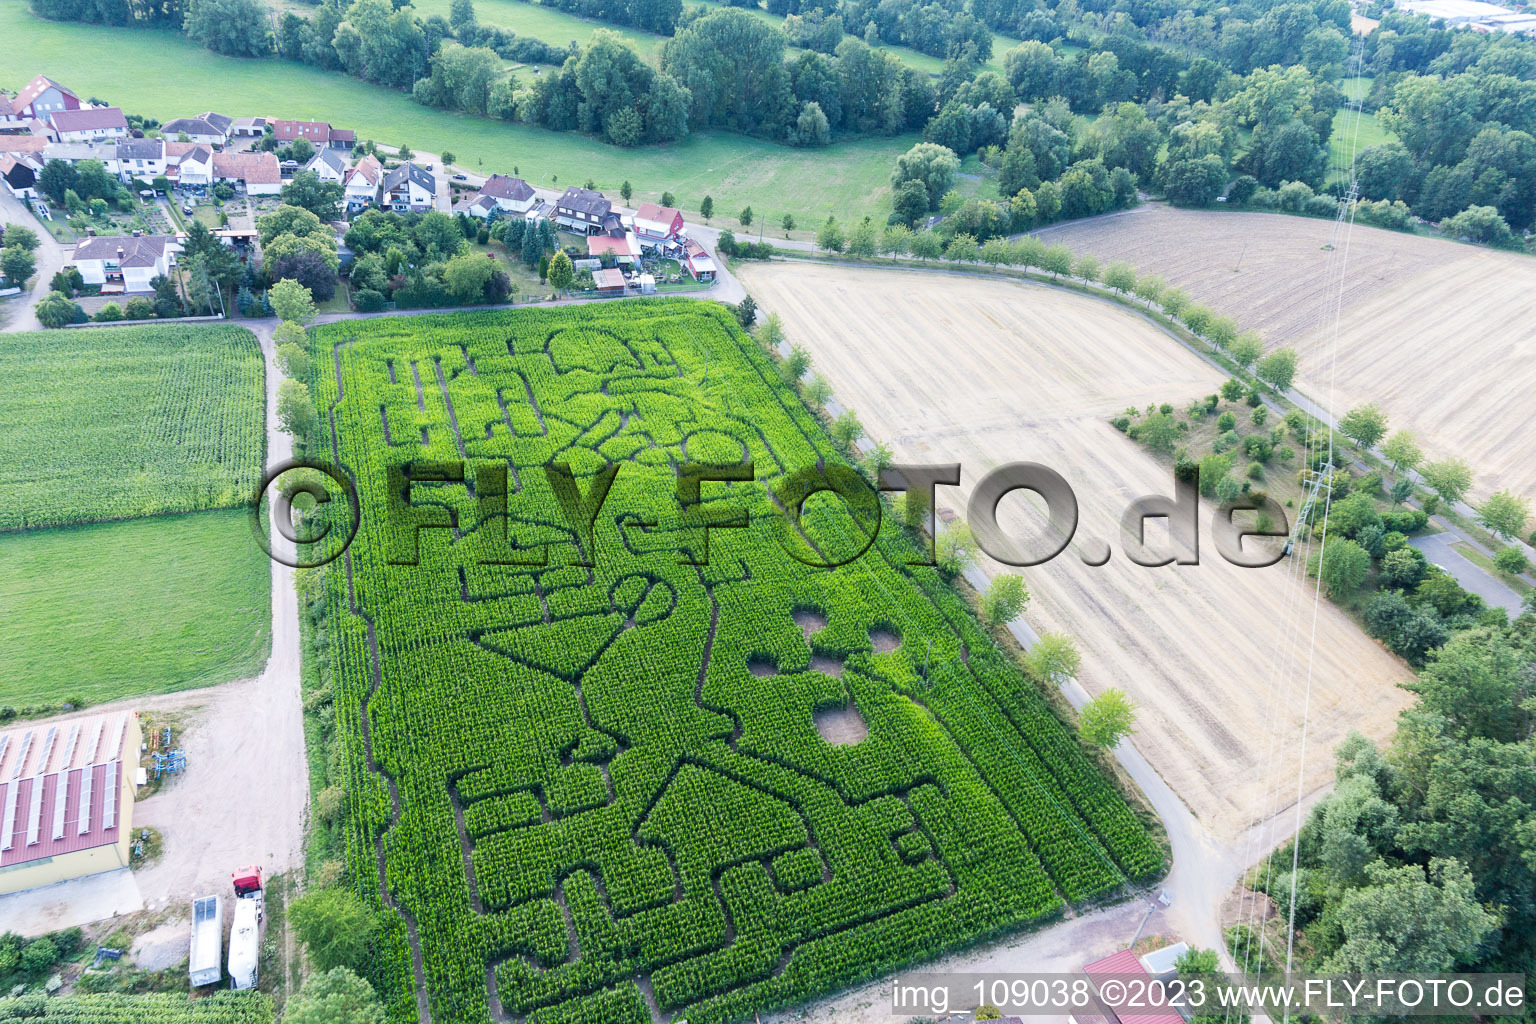 Corn maze at Seehof in Steinweiler in the state Rhineland-Palatinate, Germany from the drone perspective